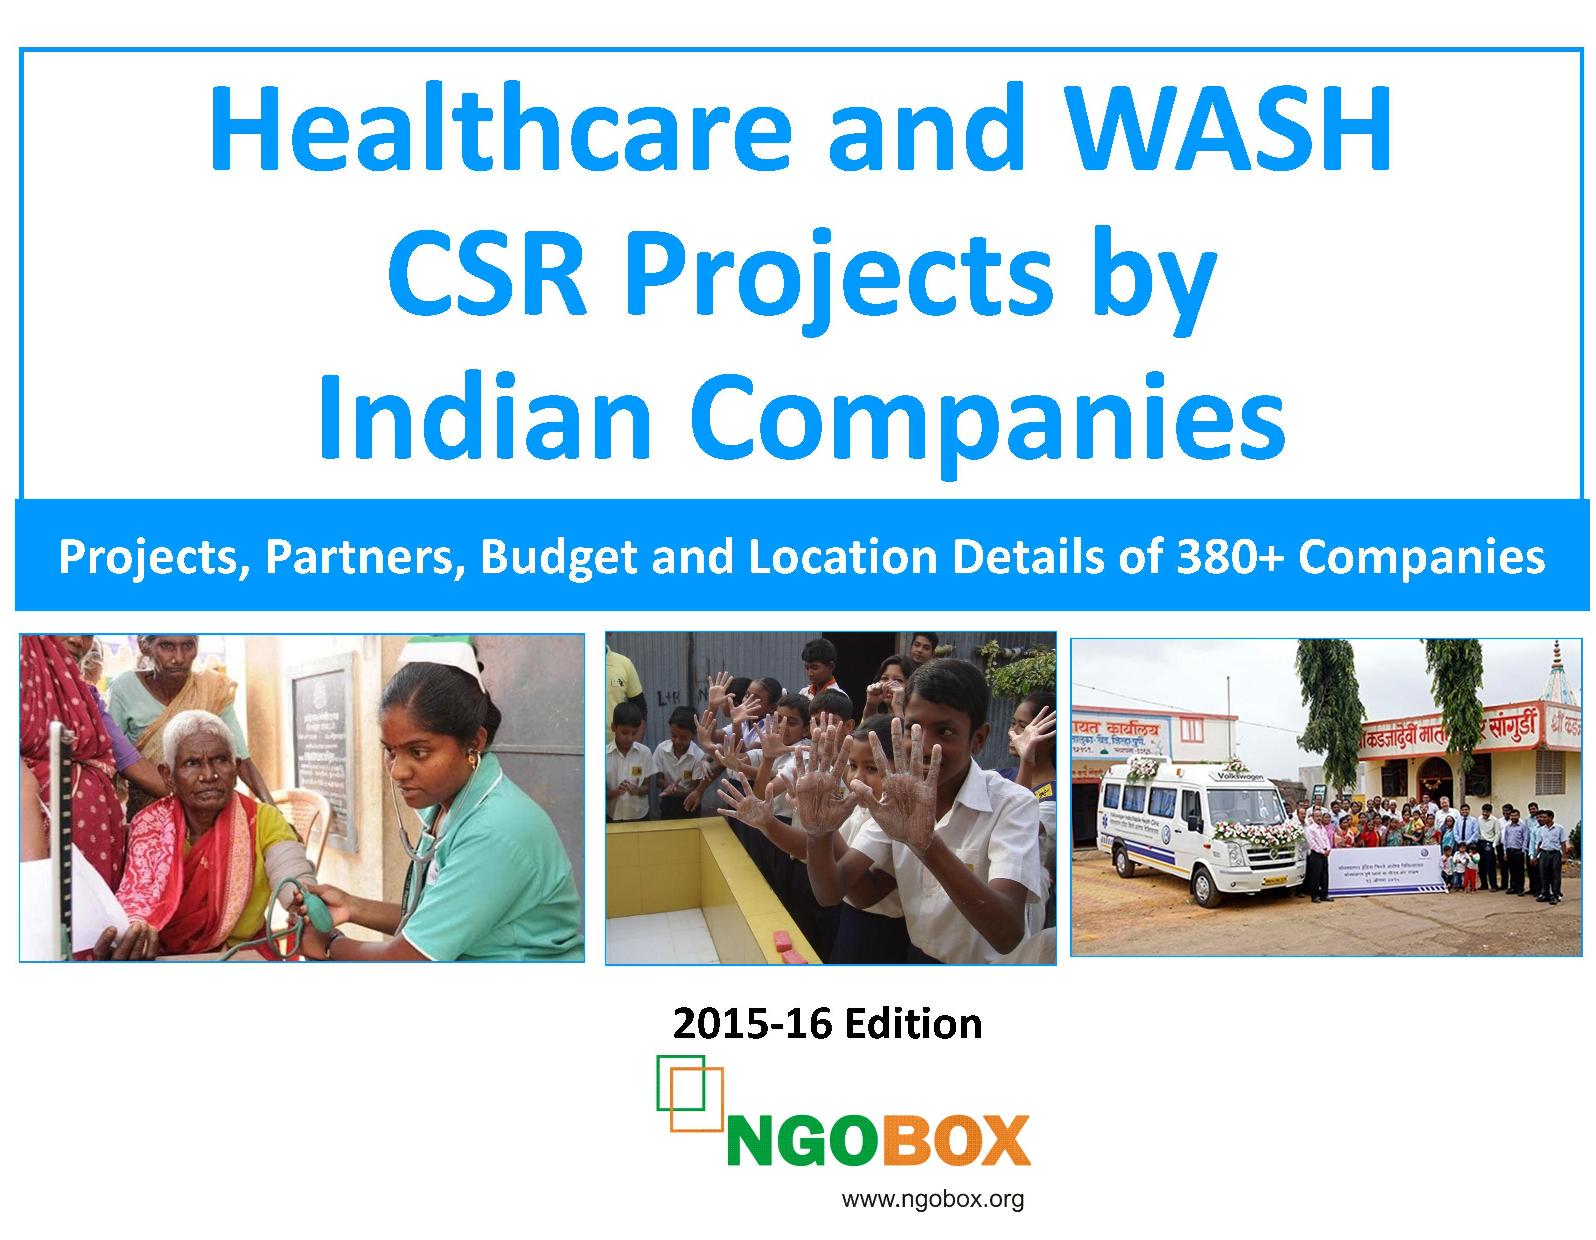 Healthcare and WASH CSR Projects by Indian Companies